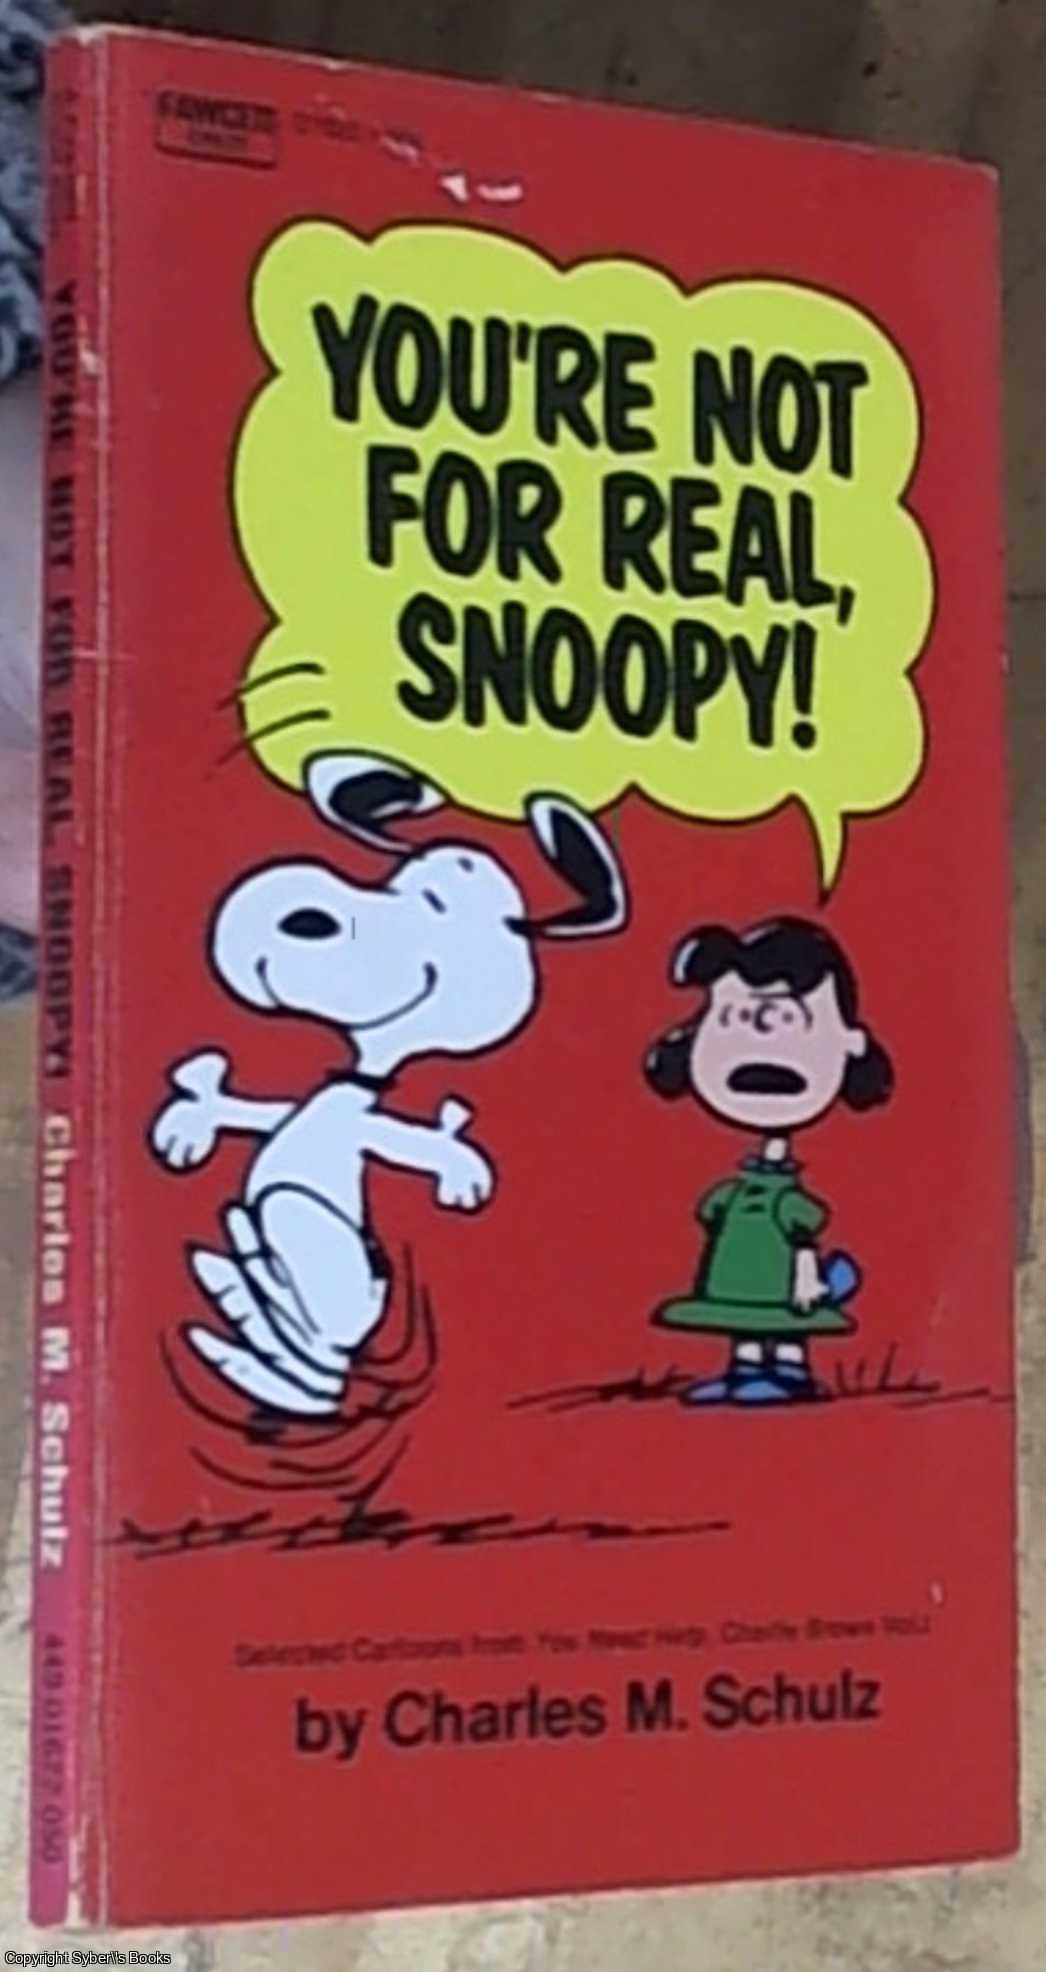 Schulz, Charles M. - You're Not for Real, Snoopy!  (Selected Cartoons From You Need Help Charlie Brown, Volume I)